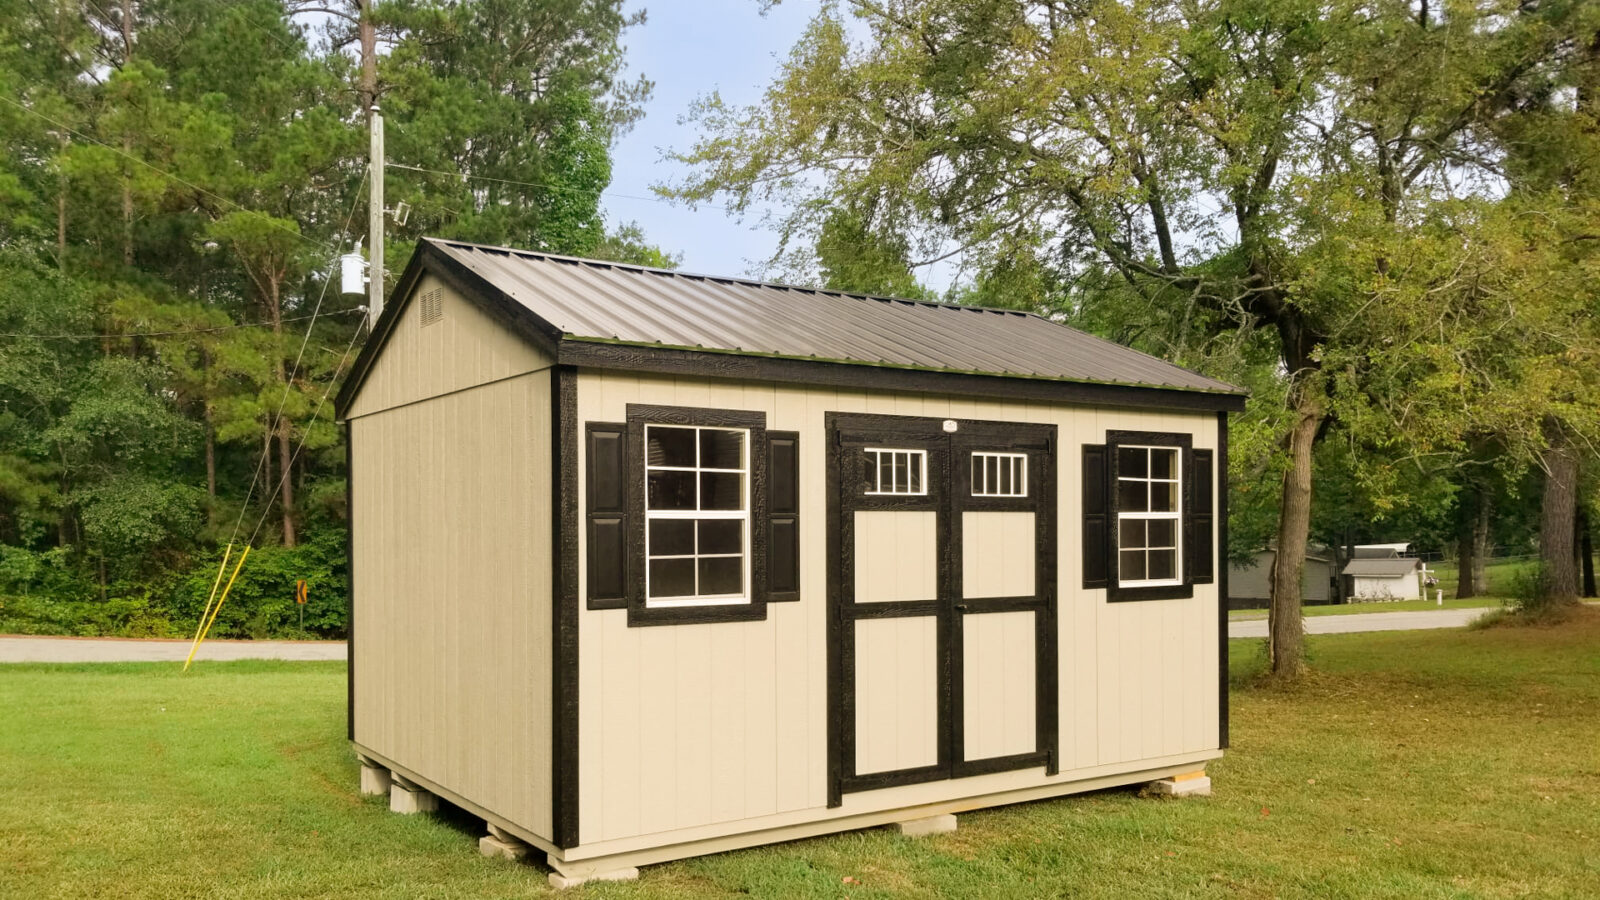 brown shed for shed permit cost in SC article